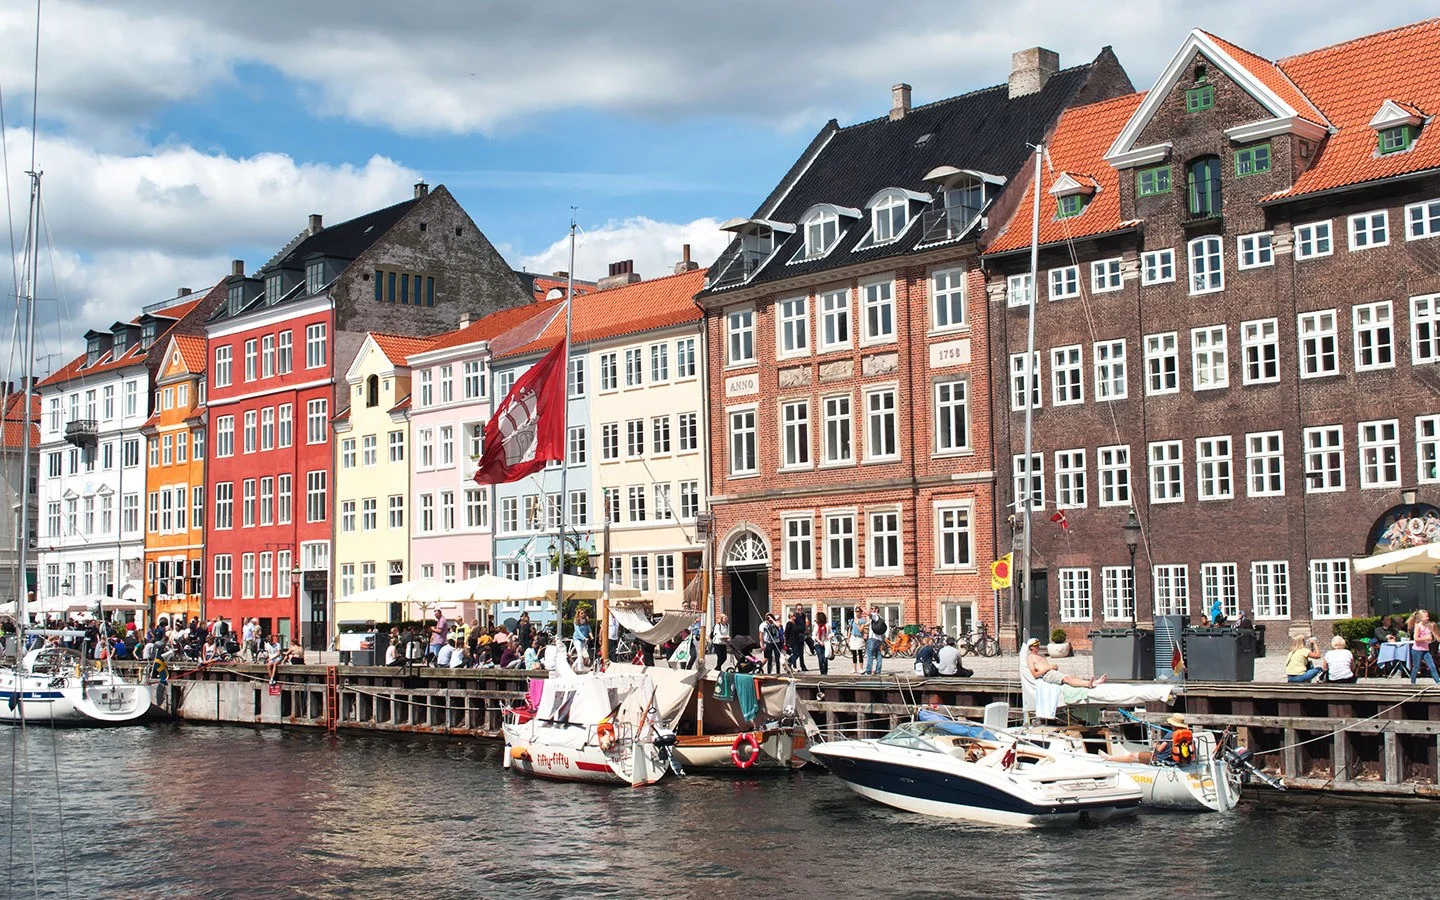 Colourful buildings on the waterfront in Nyhavn, Copenhagen